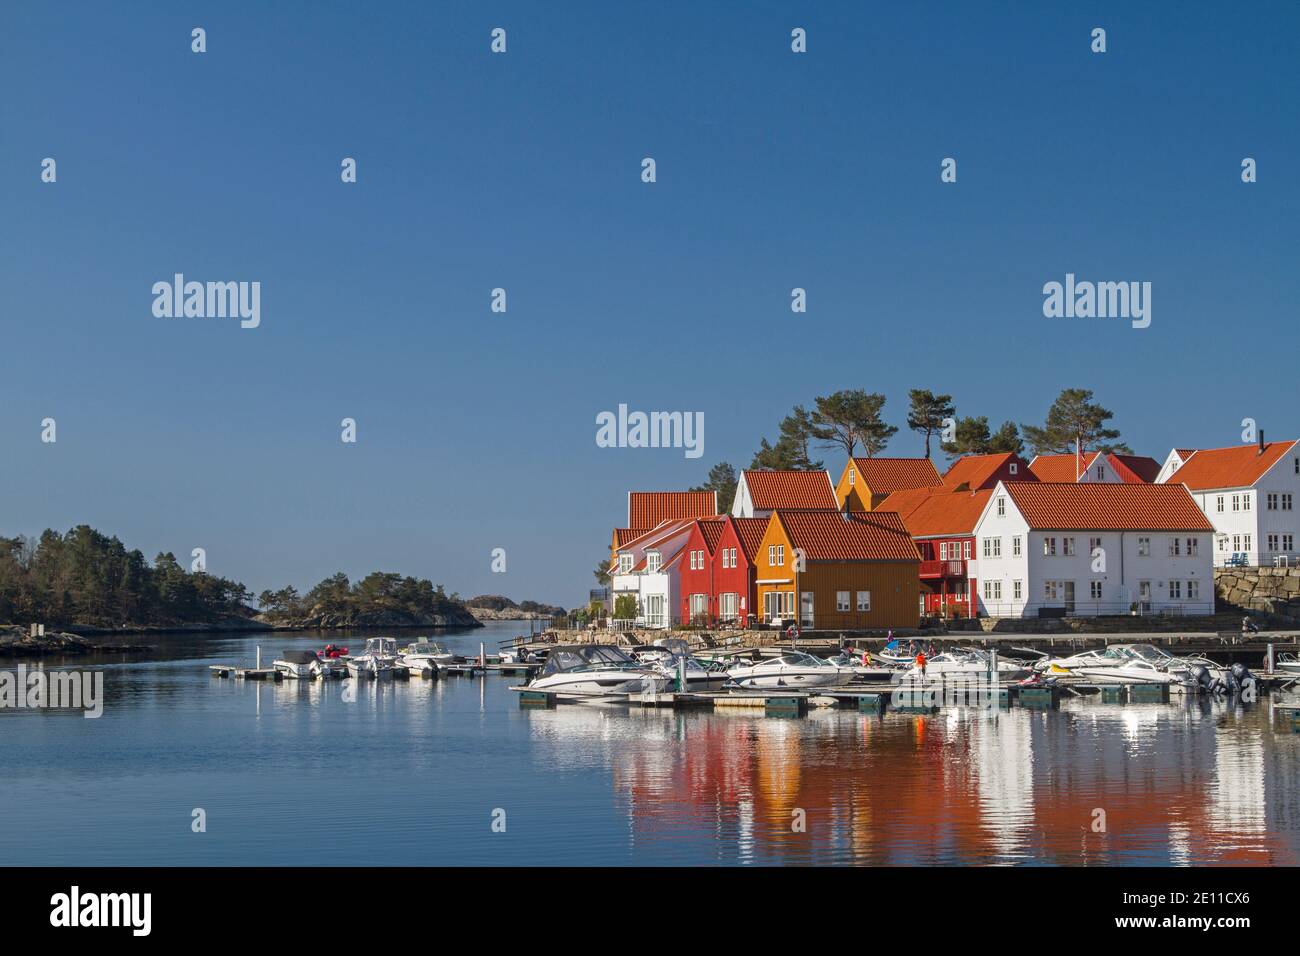 Hollen Is A Fishing Village In The County Of Vest-Agder In Norway, Situated At The Mouth Of The Sønneelva River In The North Sea Stock Photo